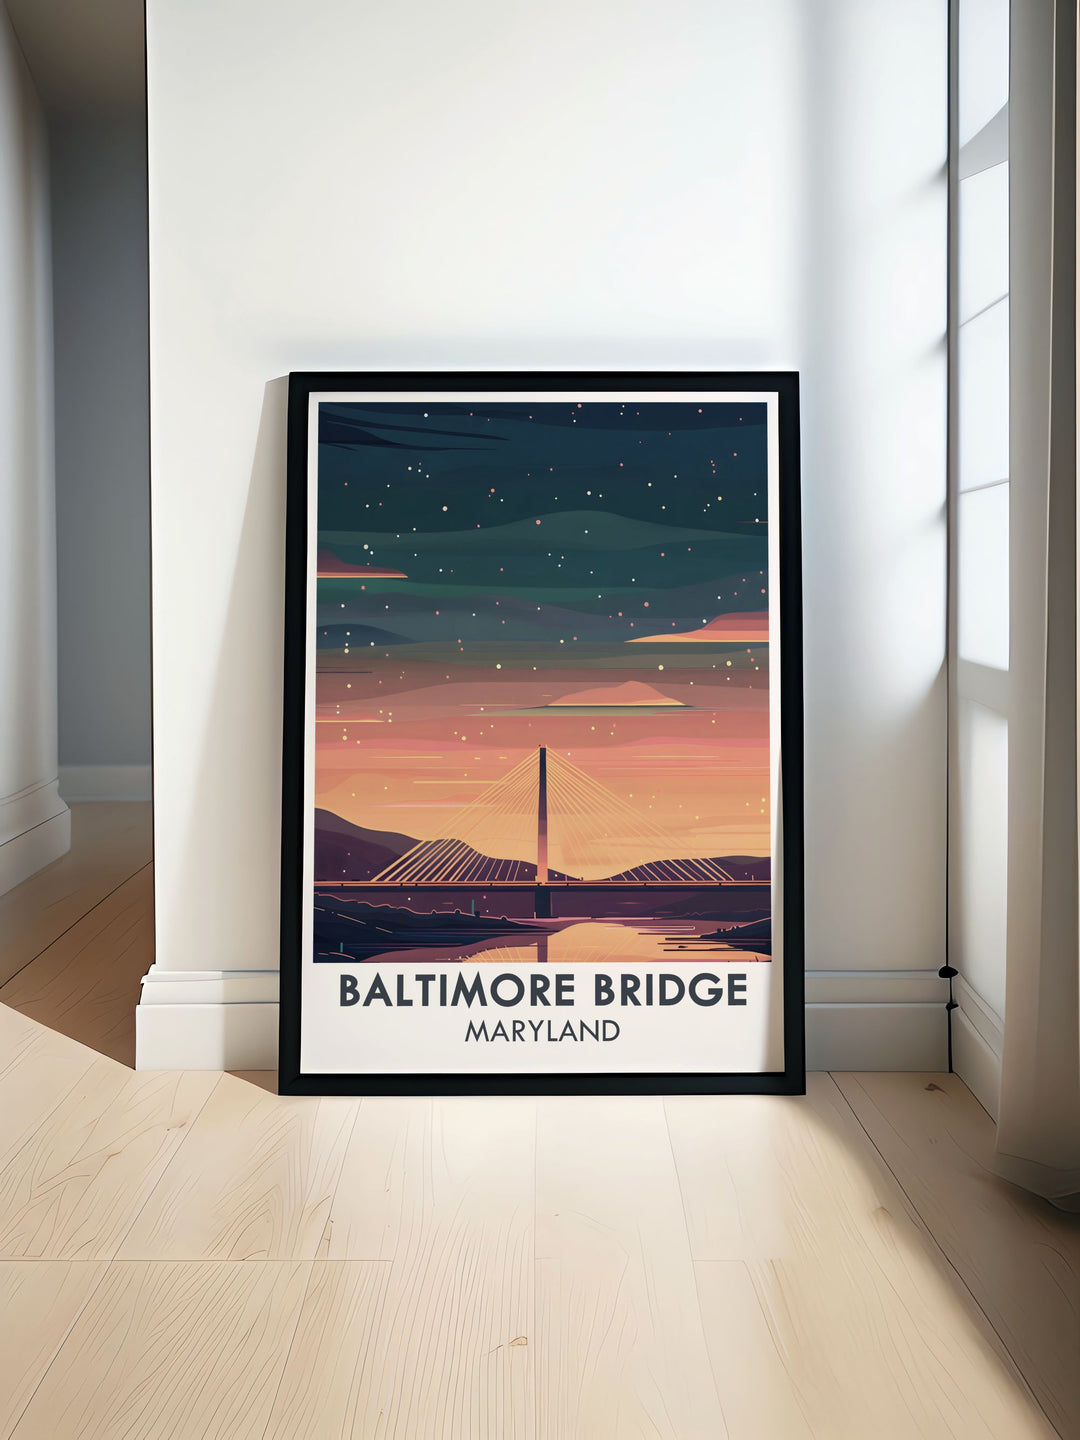 New Proposed Baltimore Bridge Design Poster featuring the replacement for the historic Francis Scott Key Bridge. This exclusive Maryland print captures the essence of Baltimore and is an ideal addition to any Maryland travel poster collection.